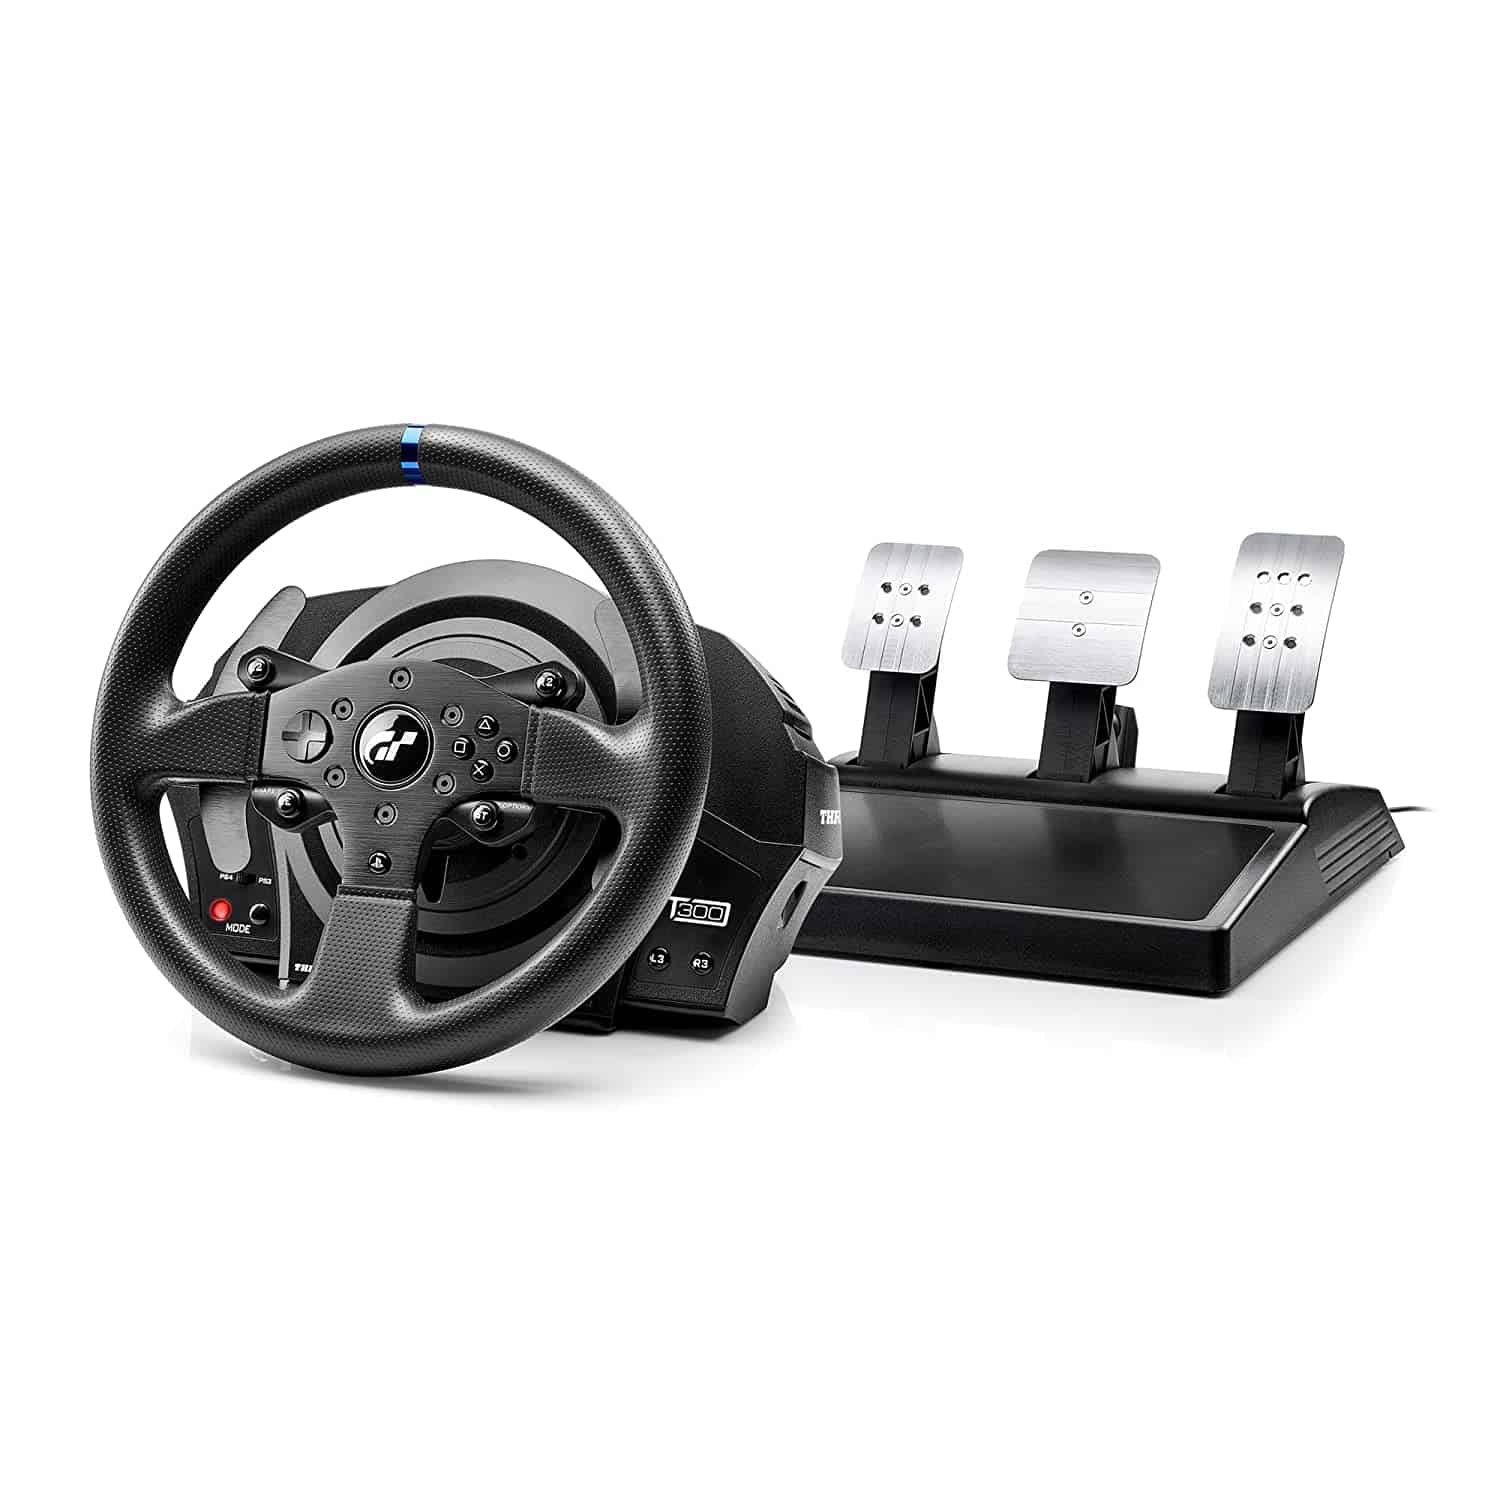 Deal Alert – Save BIG on this Thrustmaster T300 RS racing wheel at Amazon